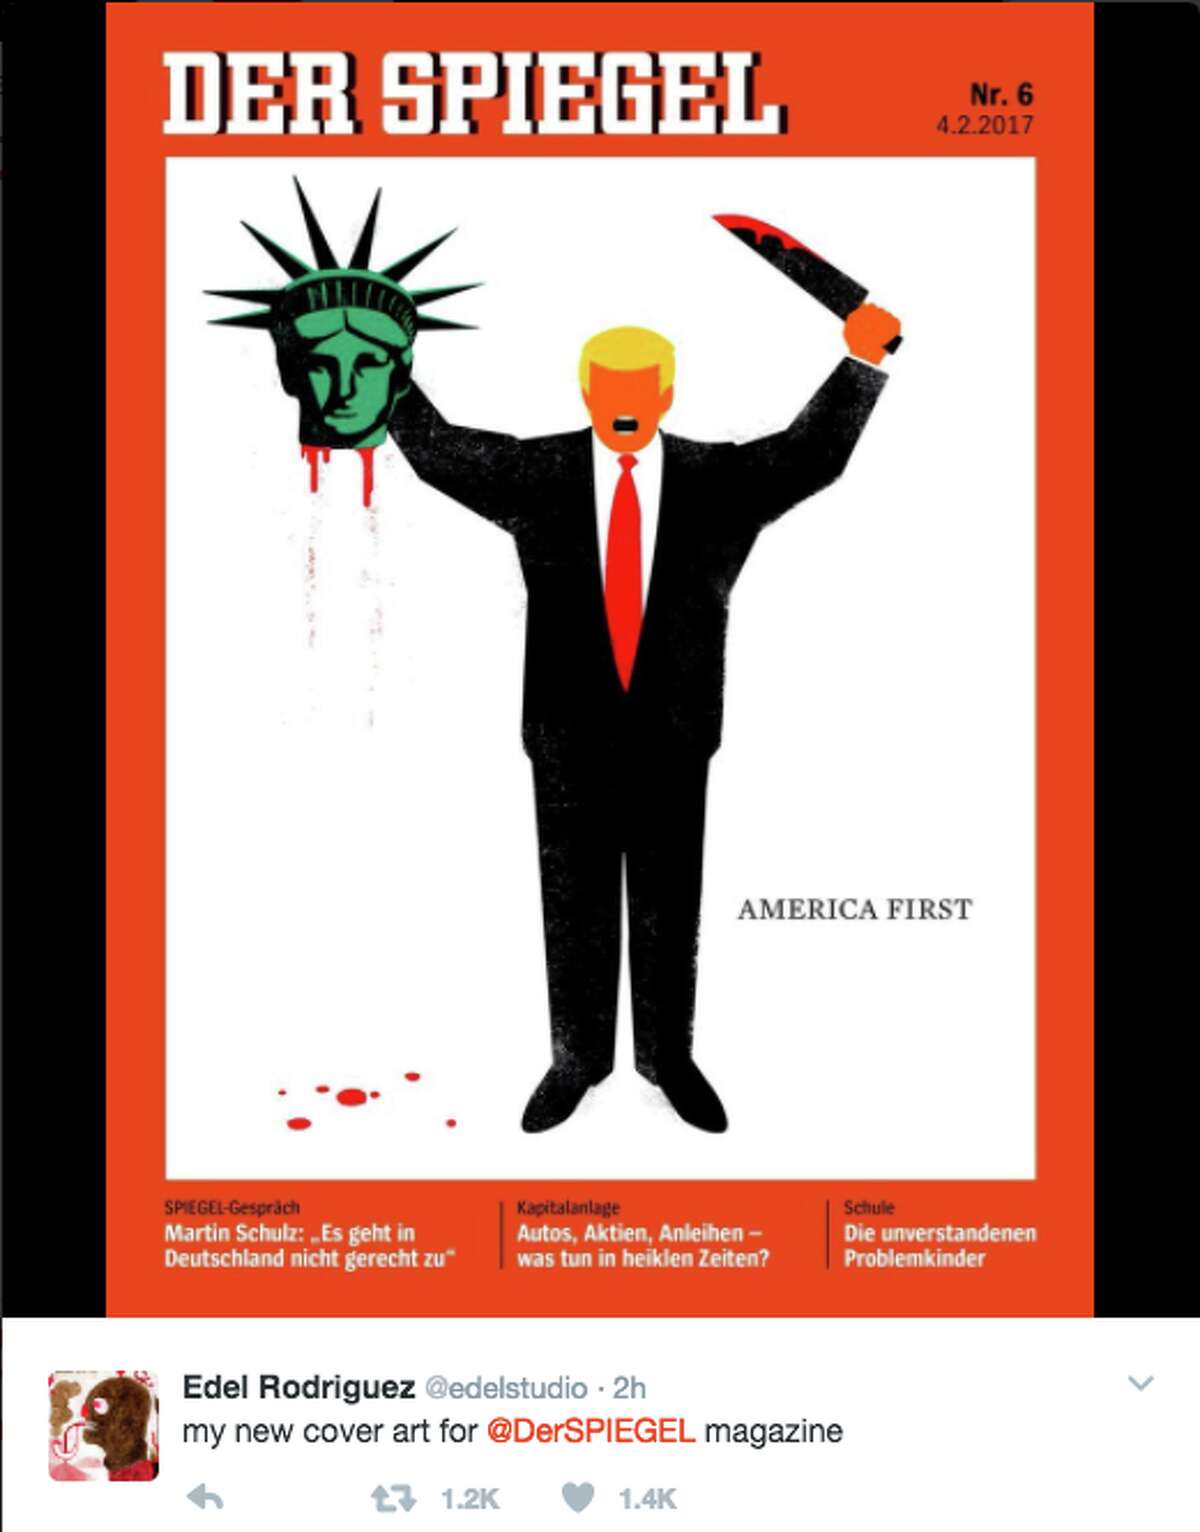 This week, several magazine cover's paint a dark picture of President Trump's first two weeks in office. Above is a cover from the German magazine The Mirror, which features President Trump decapitating the Statue of Liberty.